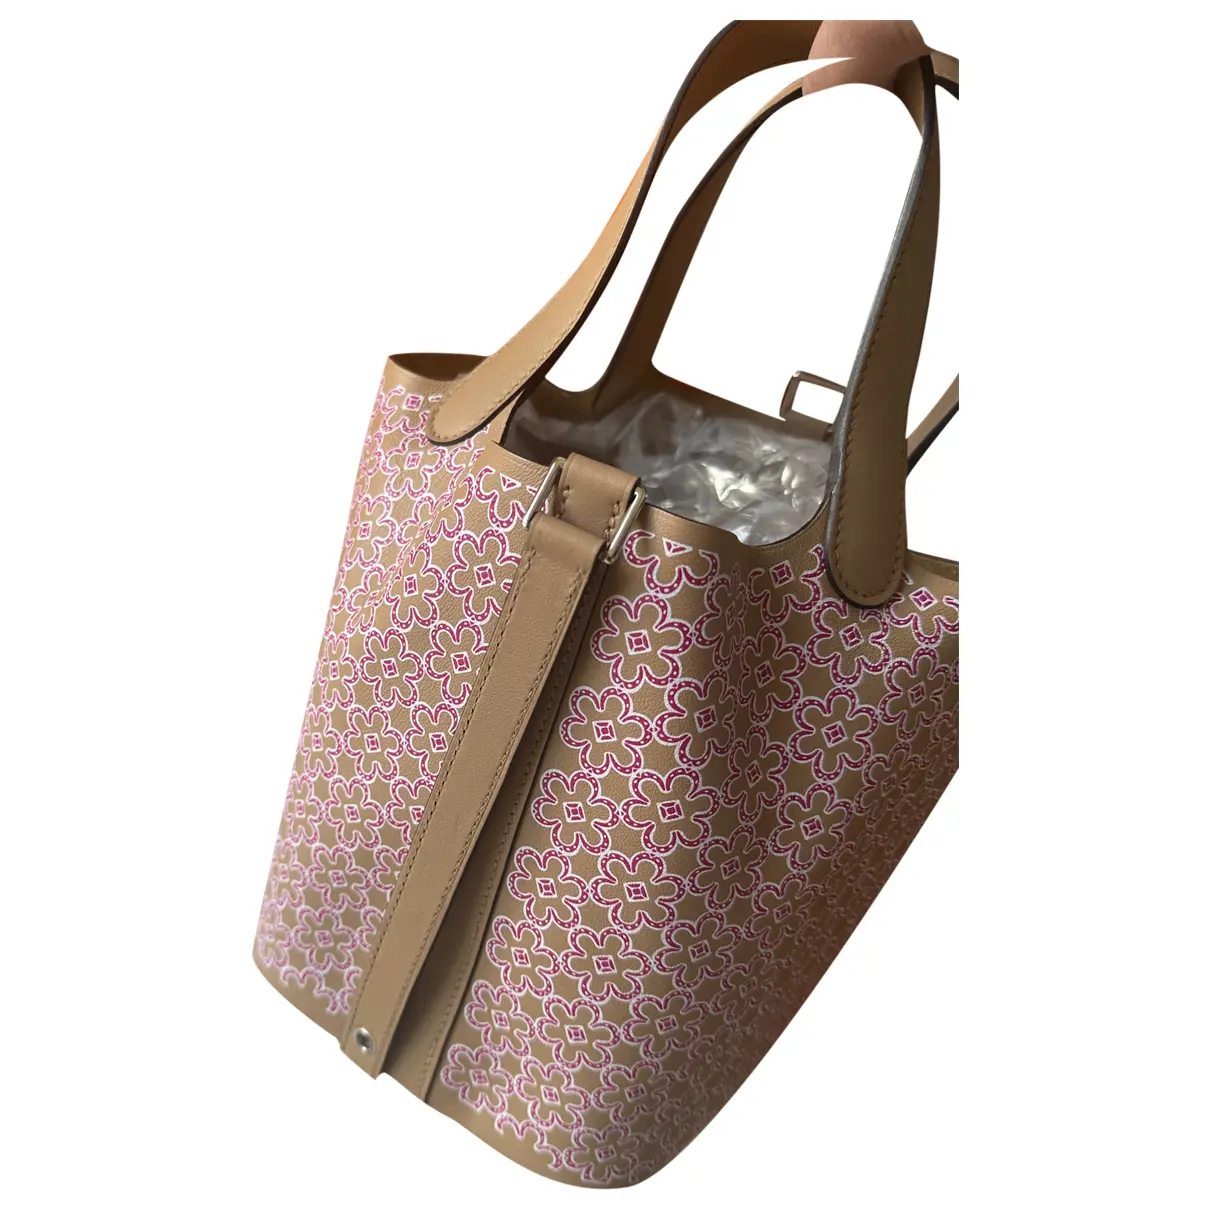 Picotin leather tote